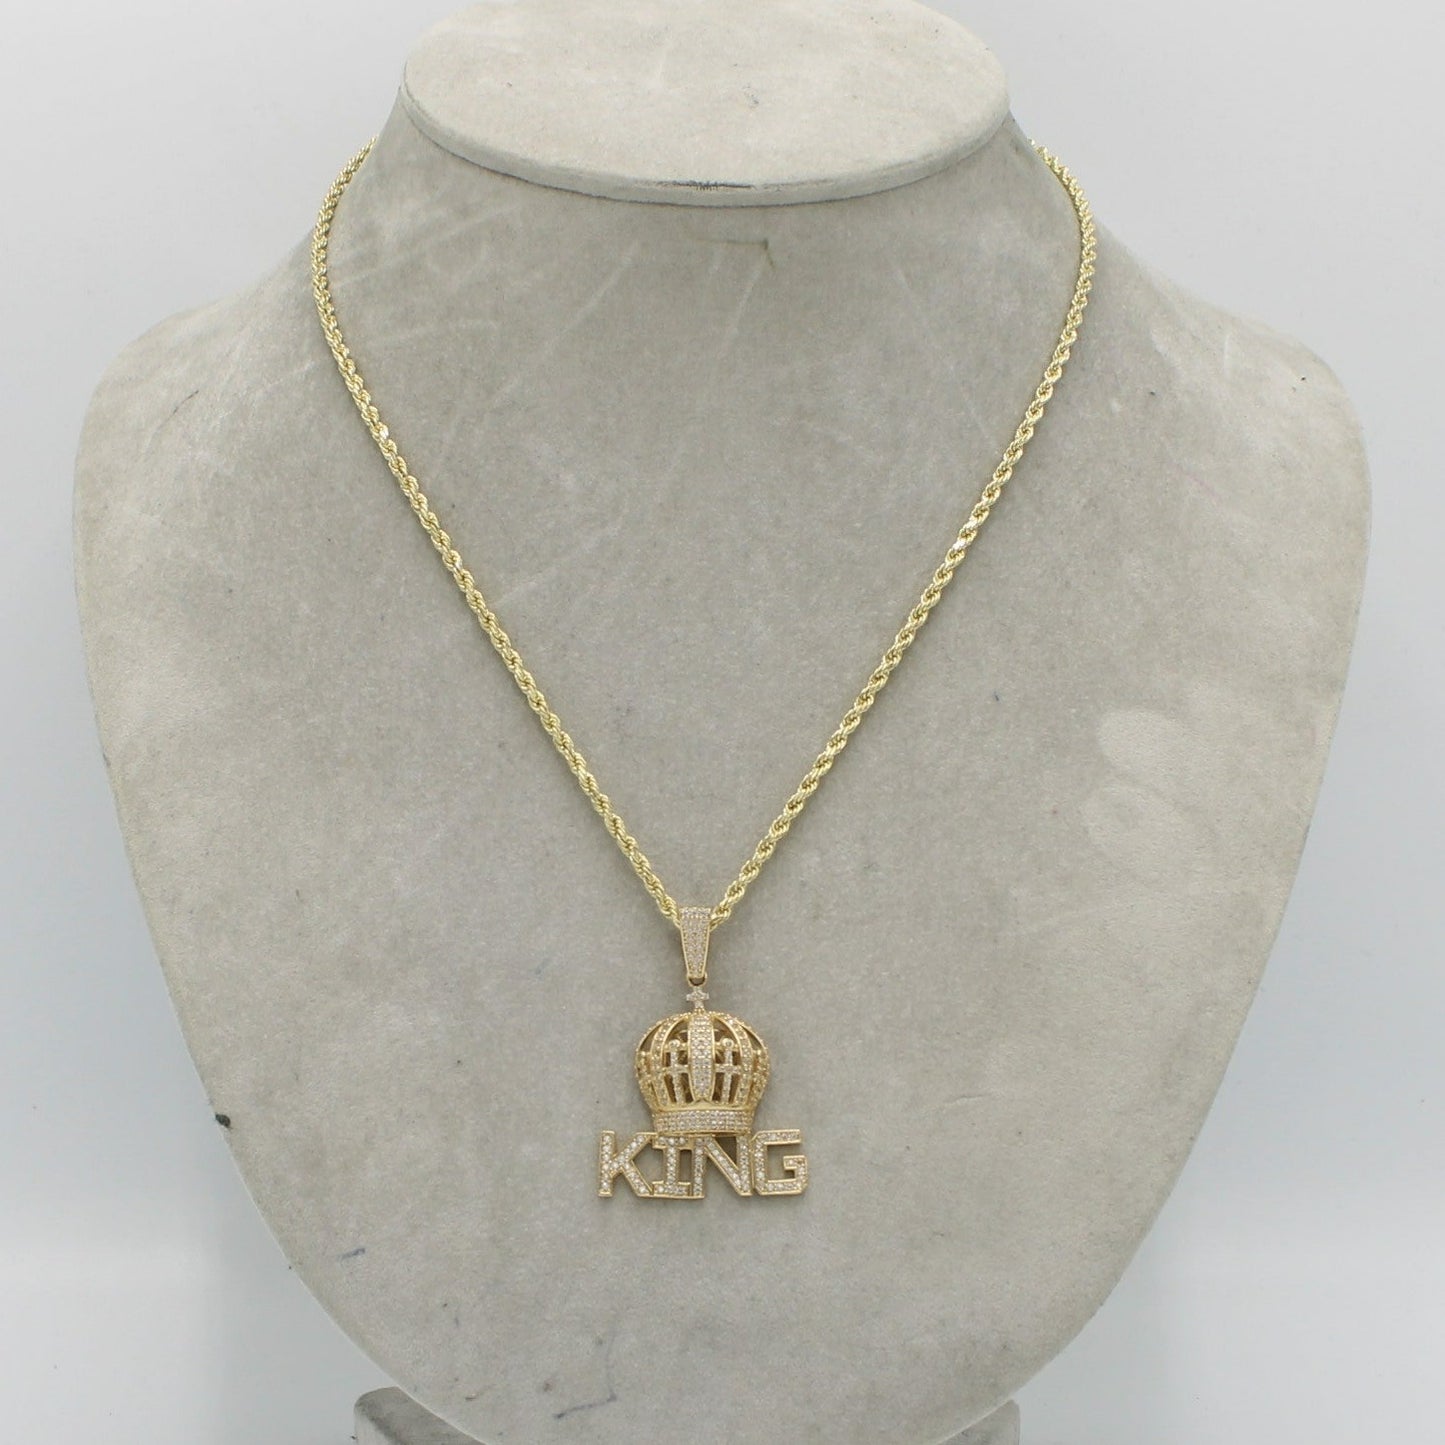 14K Crown King Pendant Cz Stones With Rope Chain Yellow Gold